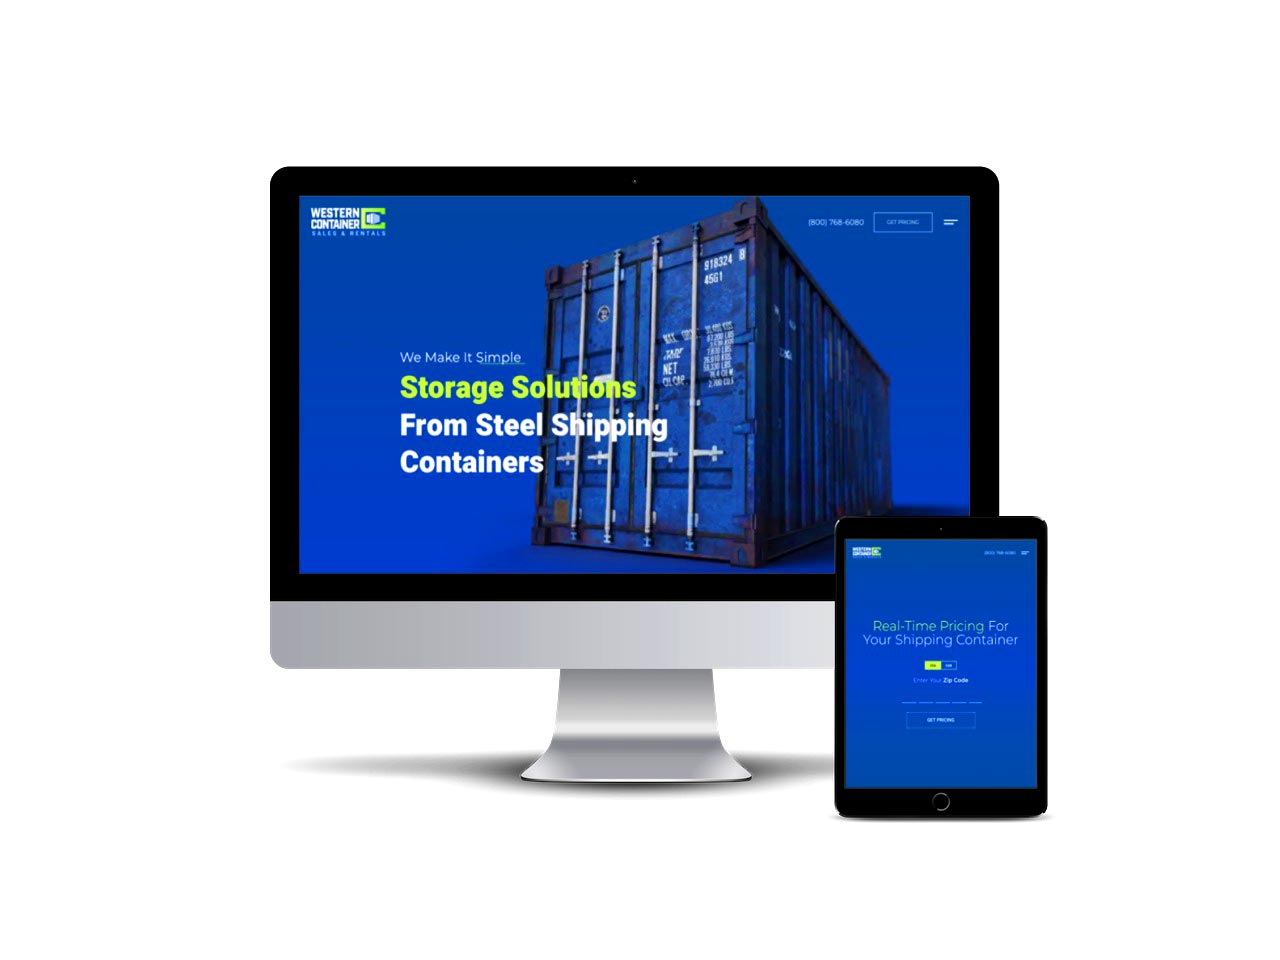 The team at 8bitstudio proudly presents the upgraded Western Container Sales website! Check out the fresh new user experience & look.